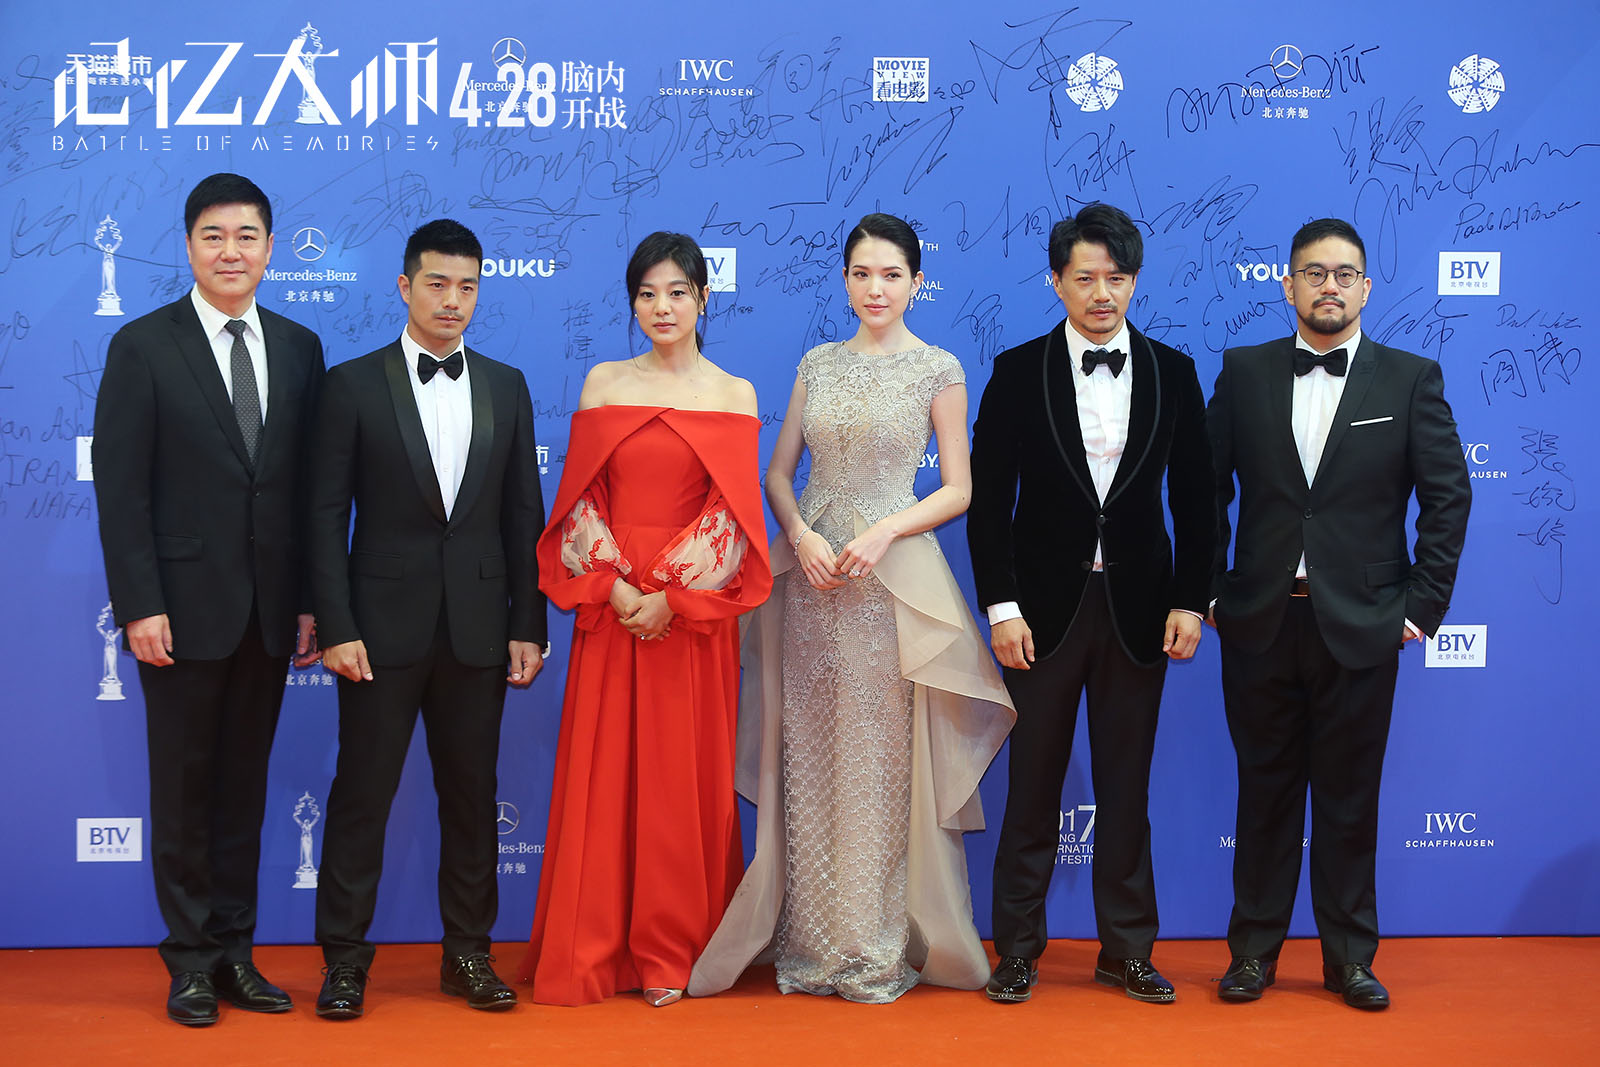 The cast members from the new sci-fi thriller Battle of Memories walk the red carpet during the Beijing International Film Festival. The movie is opening in theatres across the Chinese mainland on Friday, April 28, 2017.[Photo: China Plus]